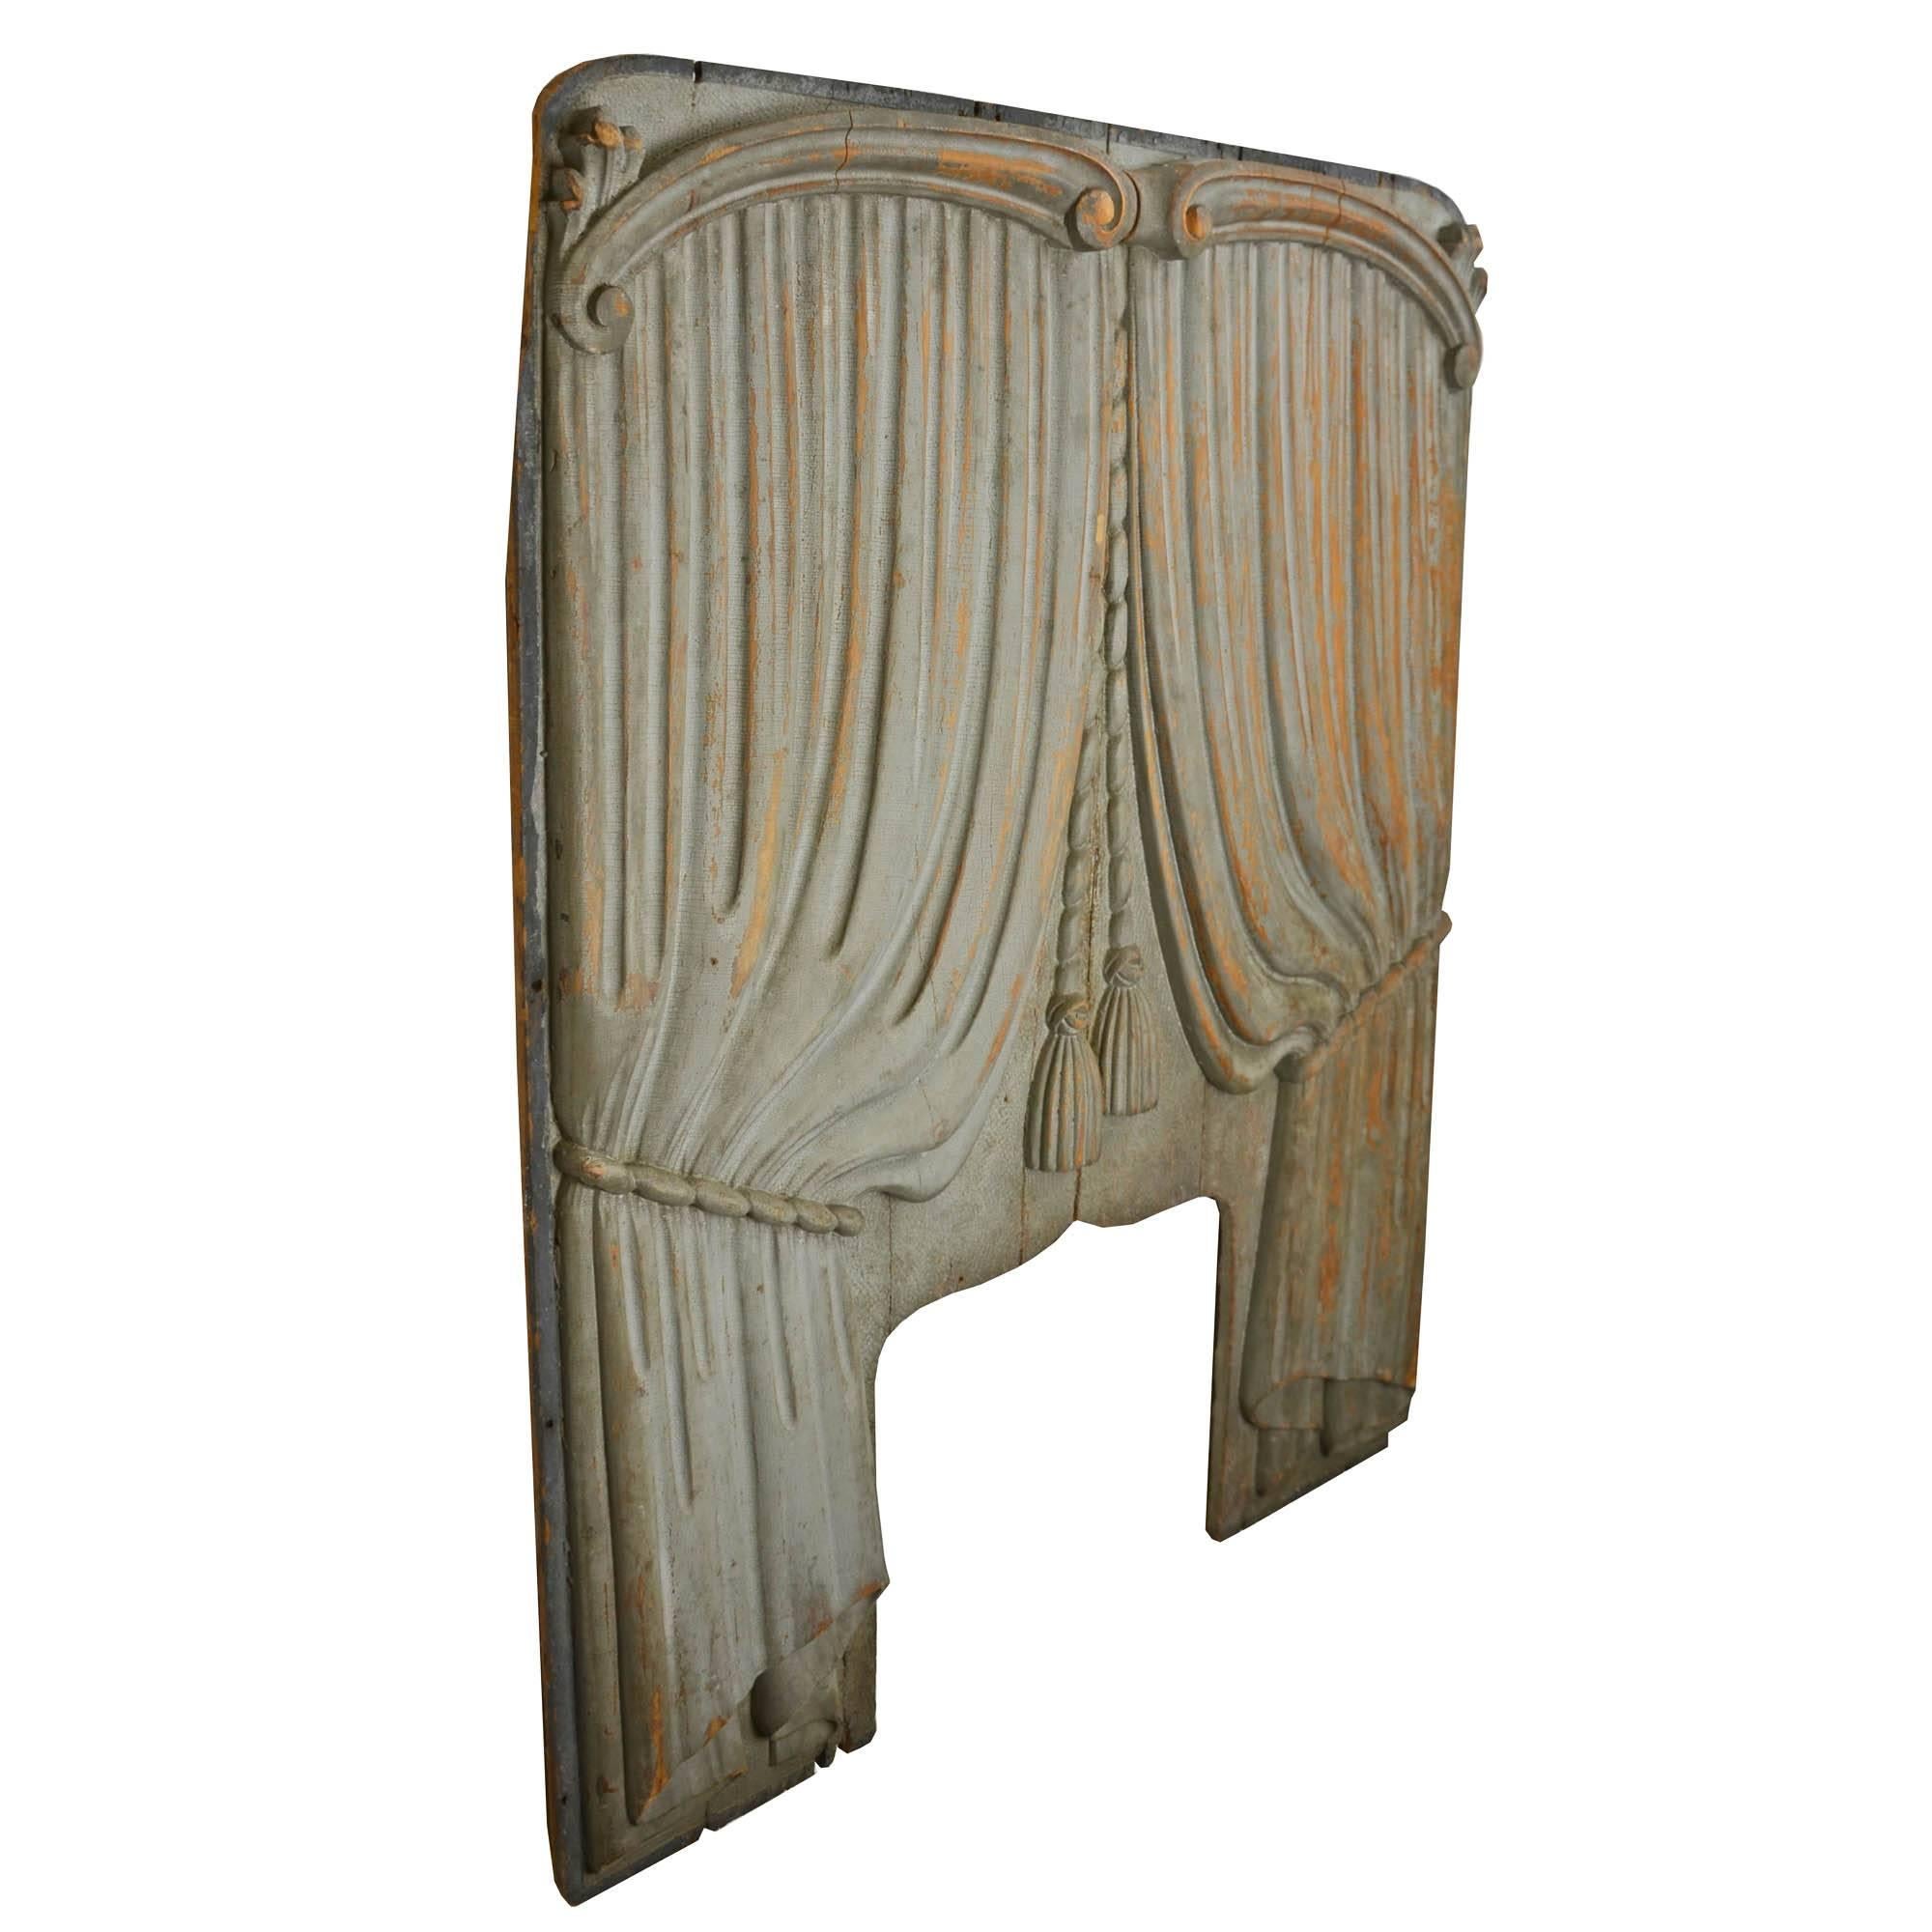 Likely salvaged from a 1920s Ford hearse, this hand-carved panel represents a unique trend in automotive history. Originally, horse-drawn funeral carriages were adorned with silk or velvet hangings, but, over time, the curtains were replaced with